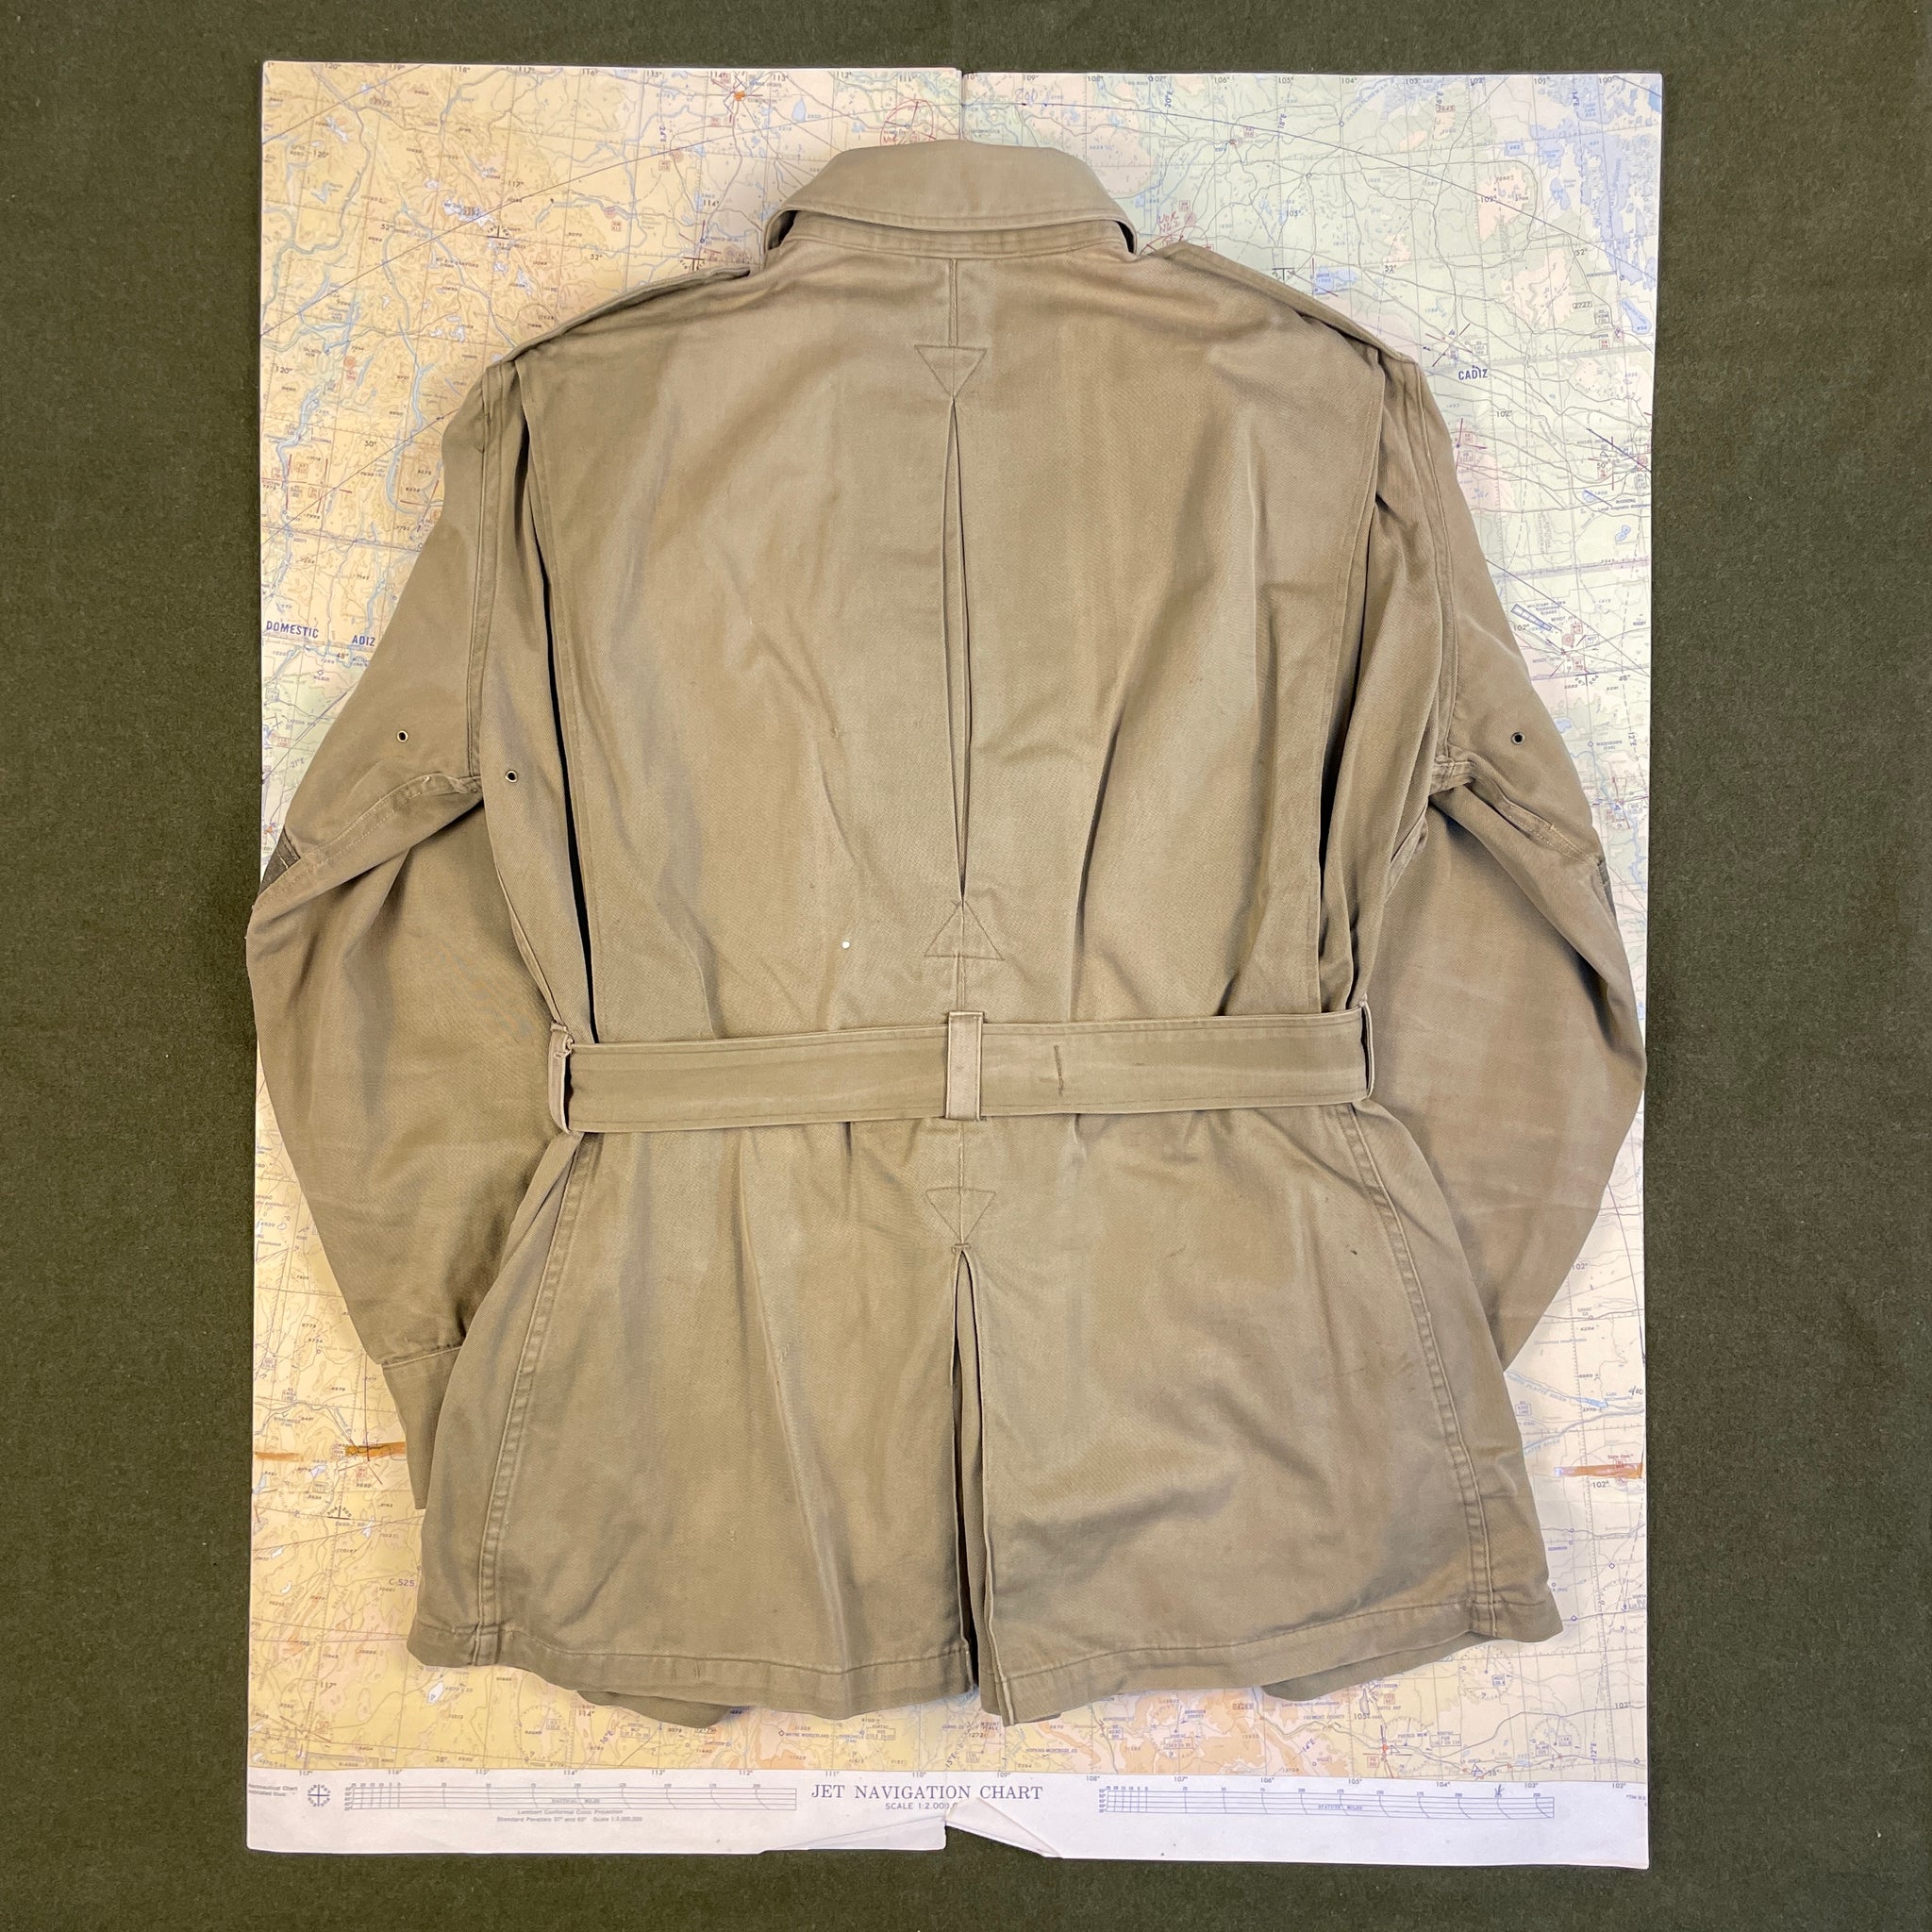 US Army M42 Paratrooper Jump Jacket Reinforced and Attributed to a